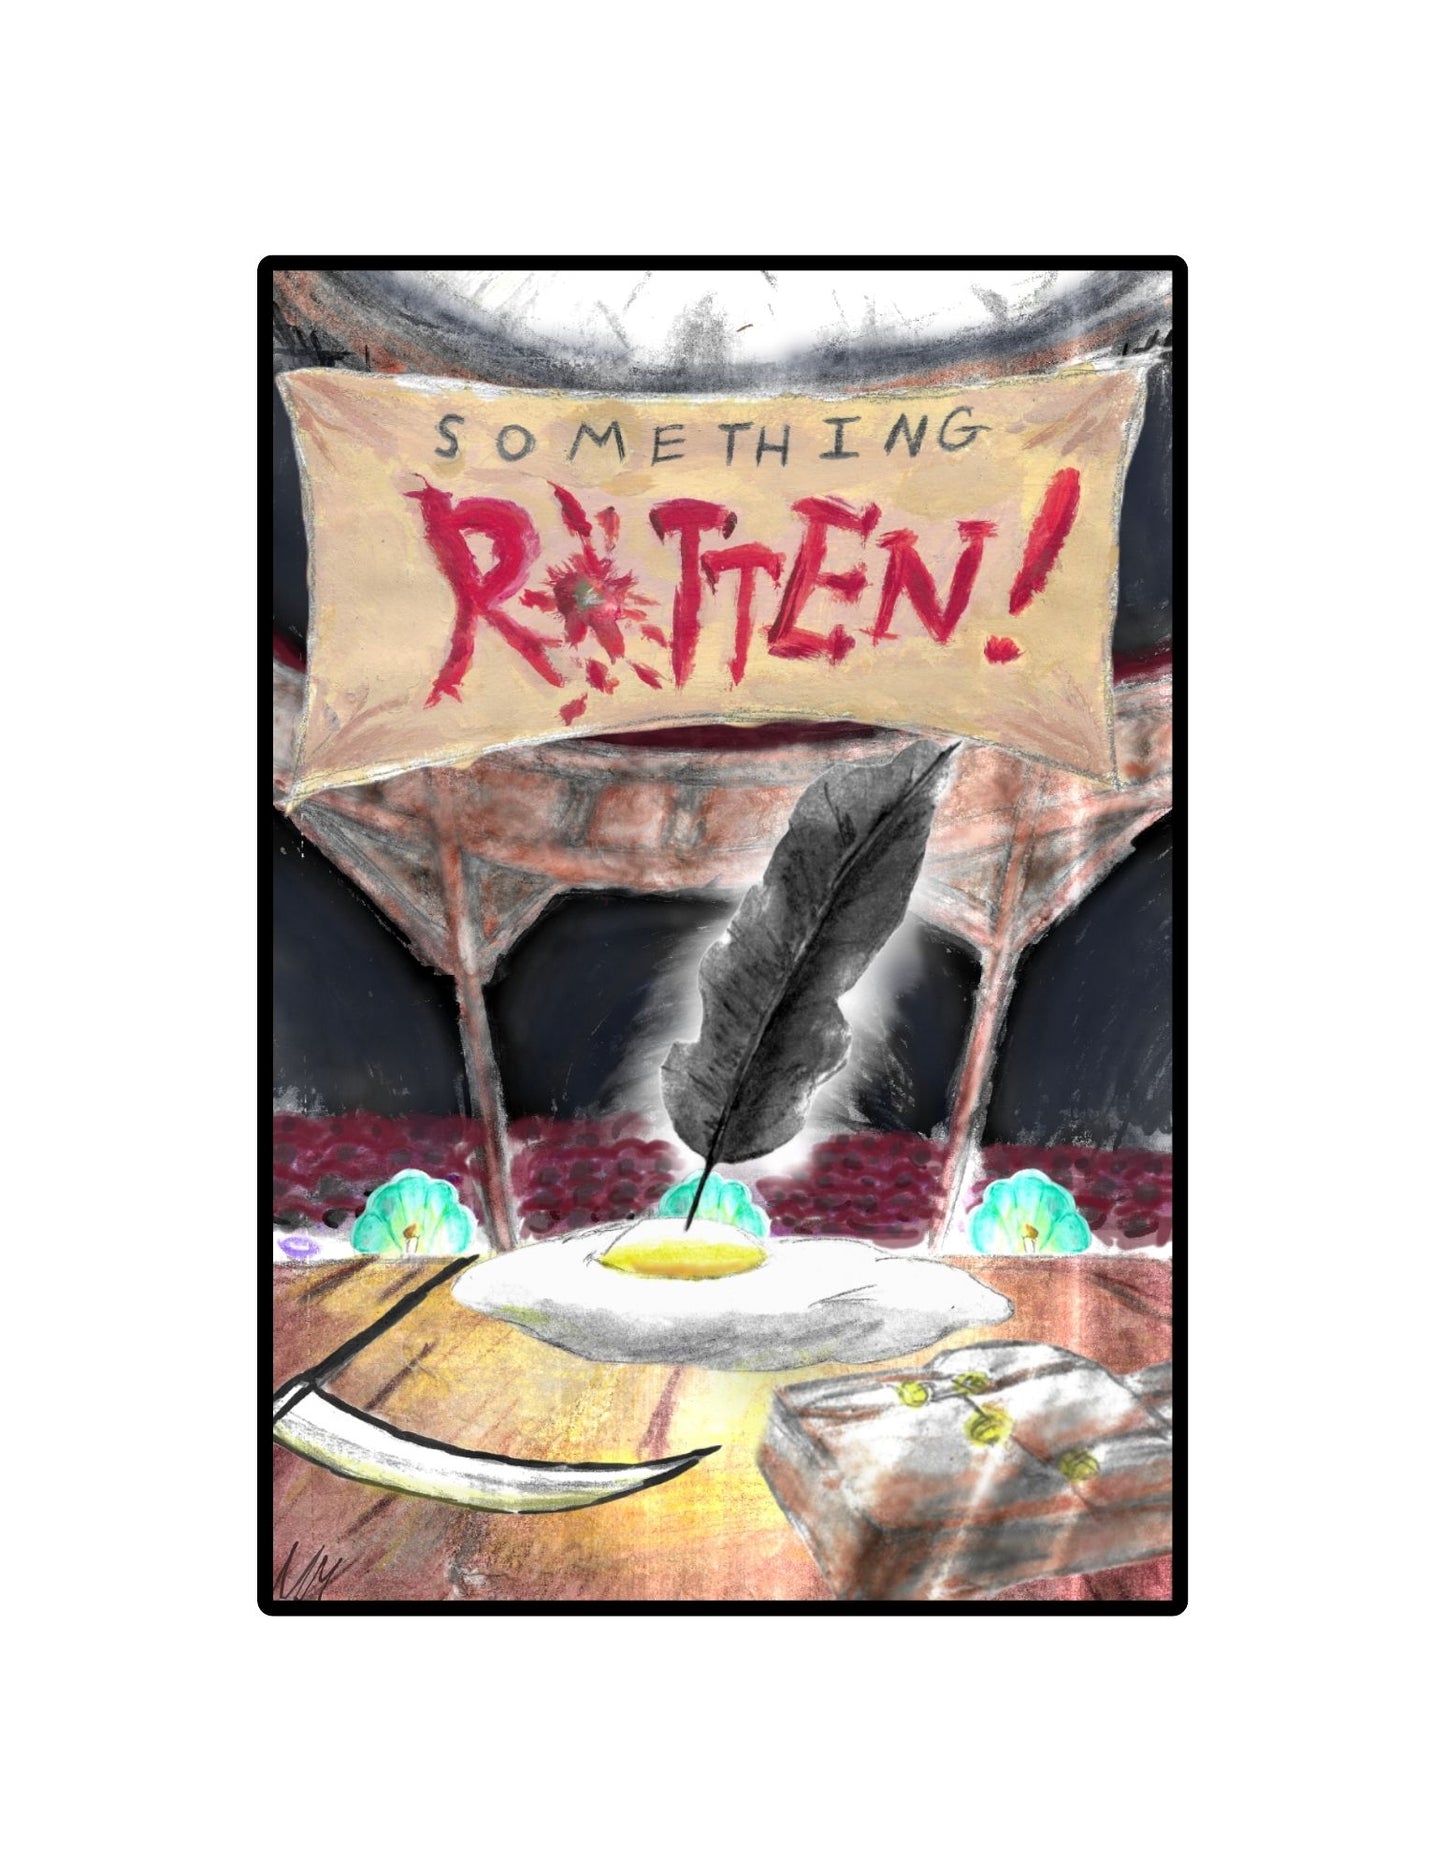 Something Rotten! Tickets